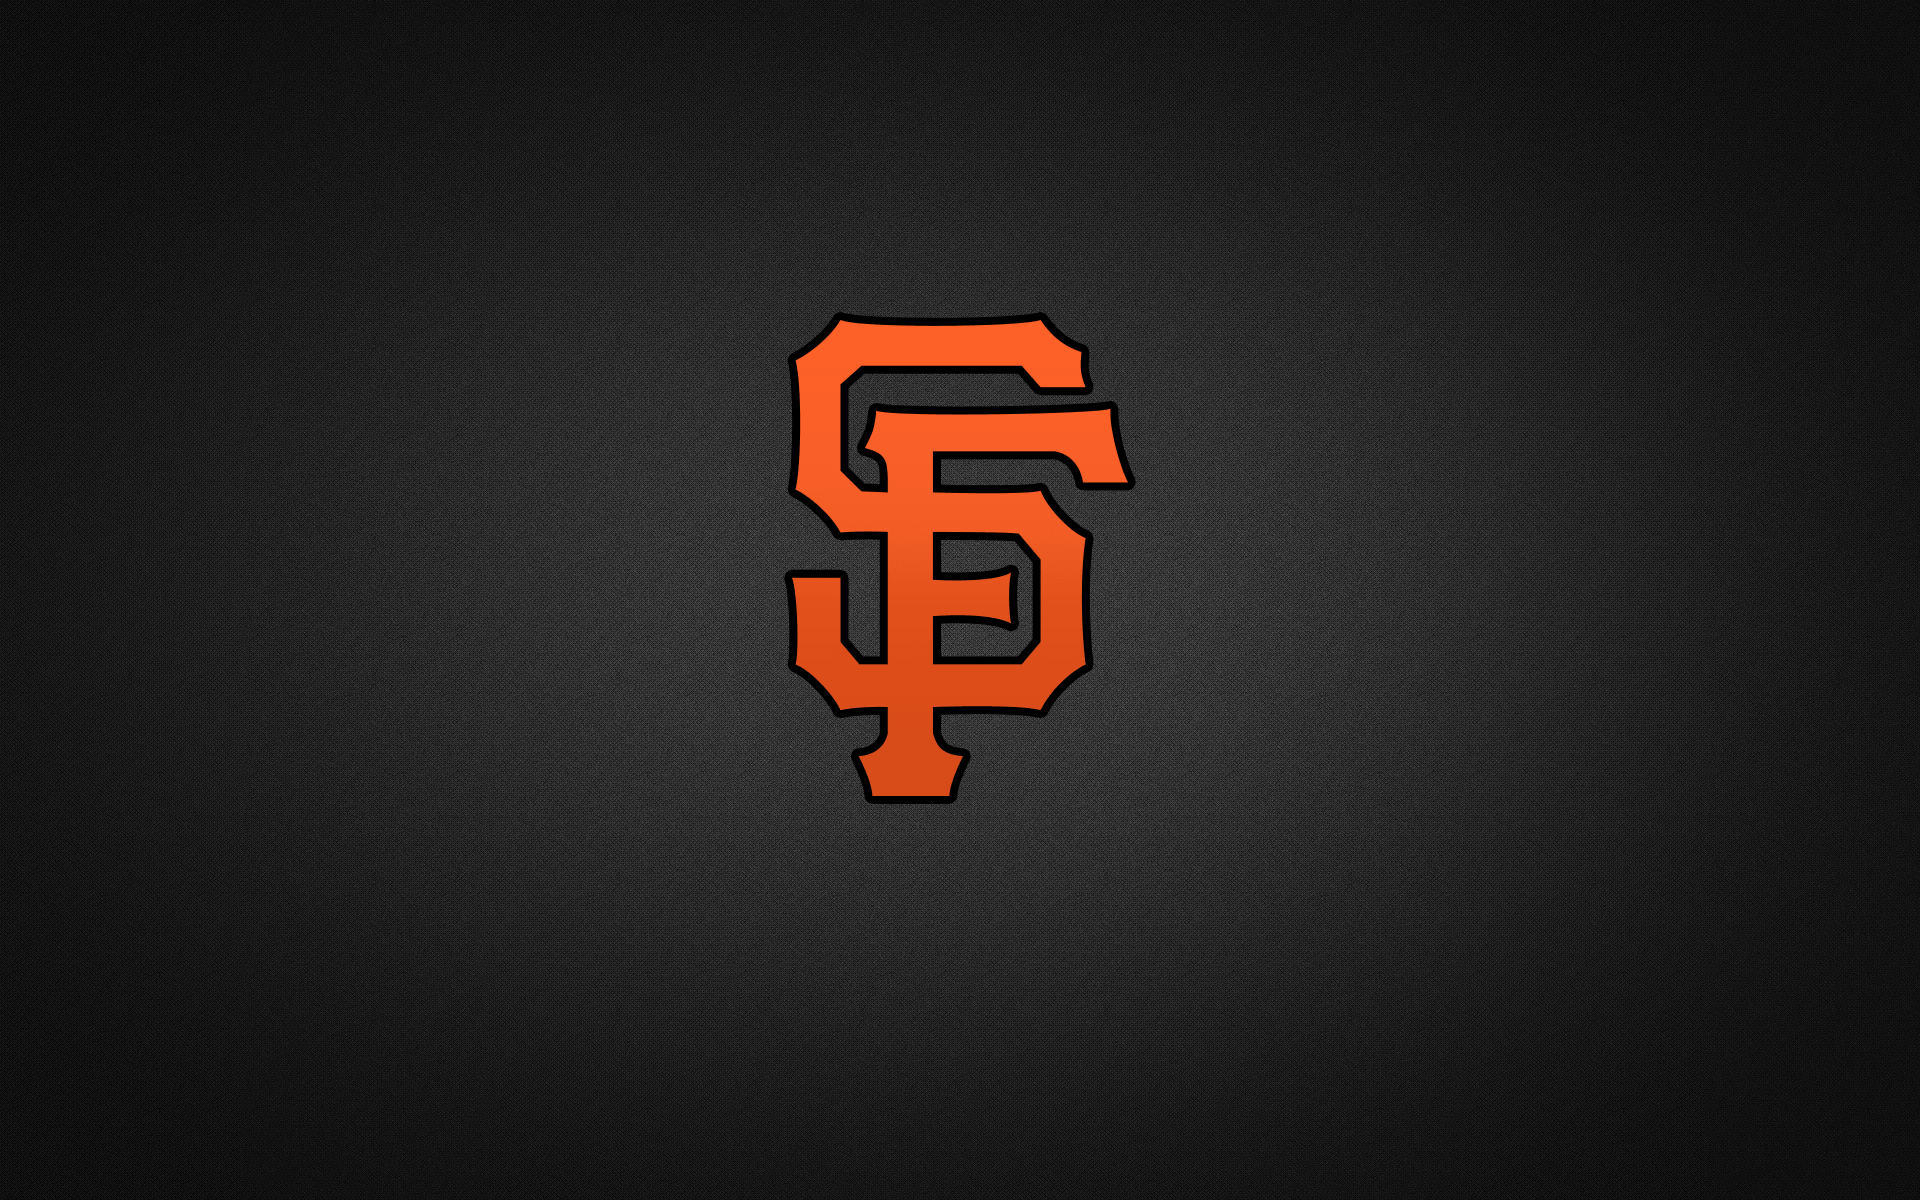 I couldn't find any good Giants desktop wallpaper so I made one if anyone is interested